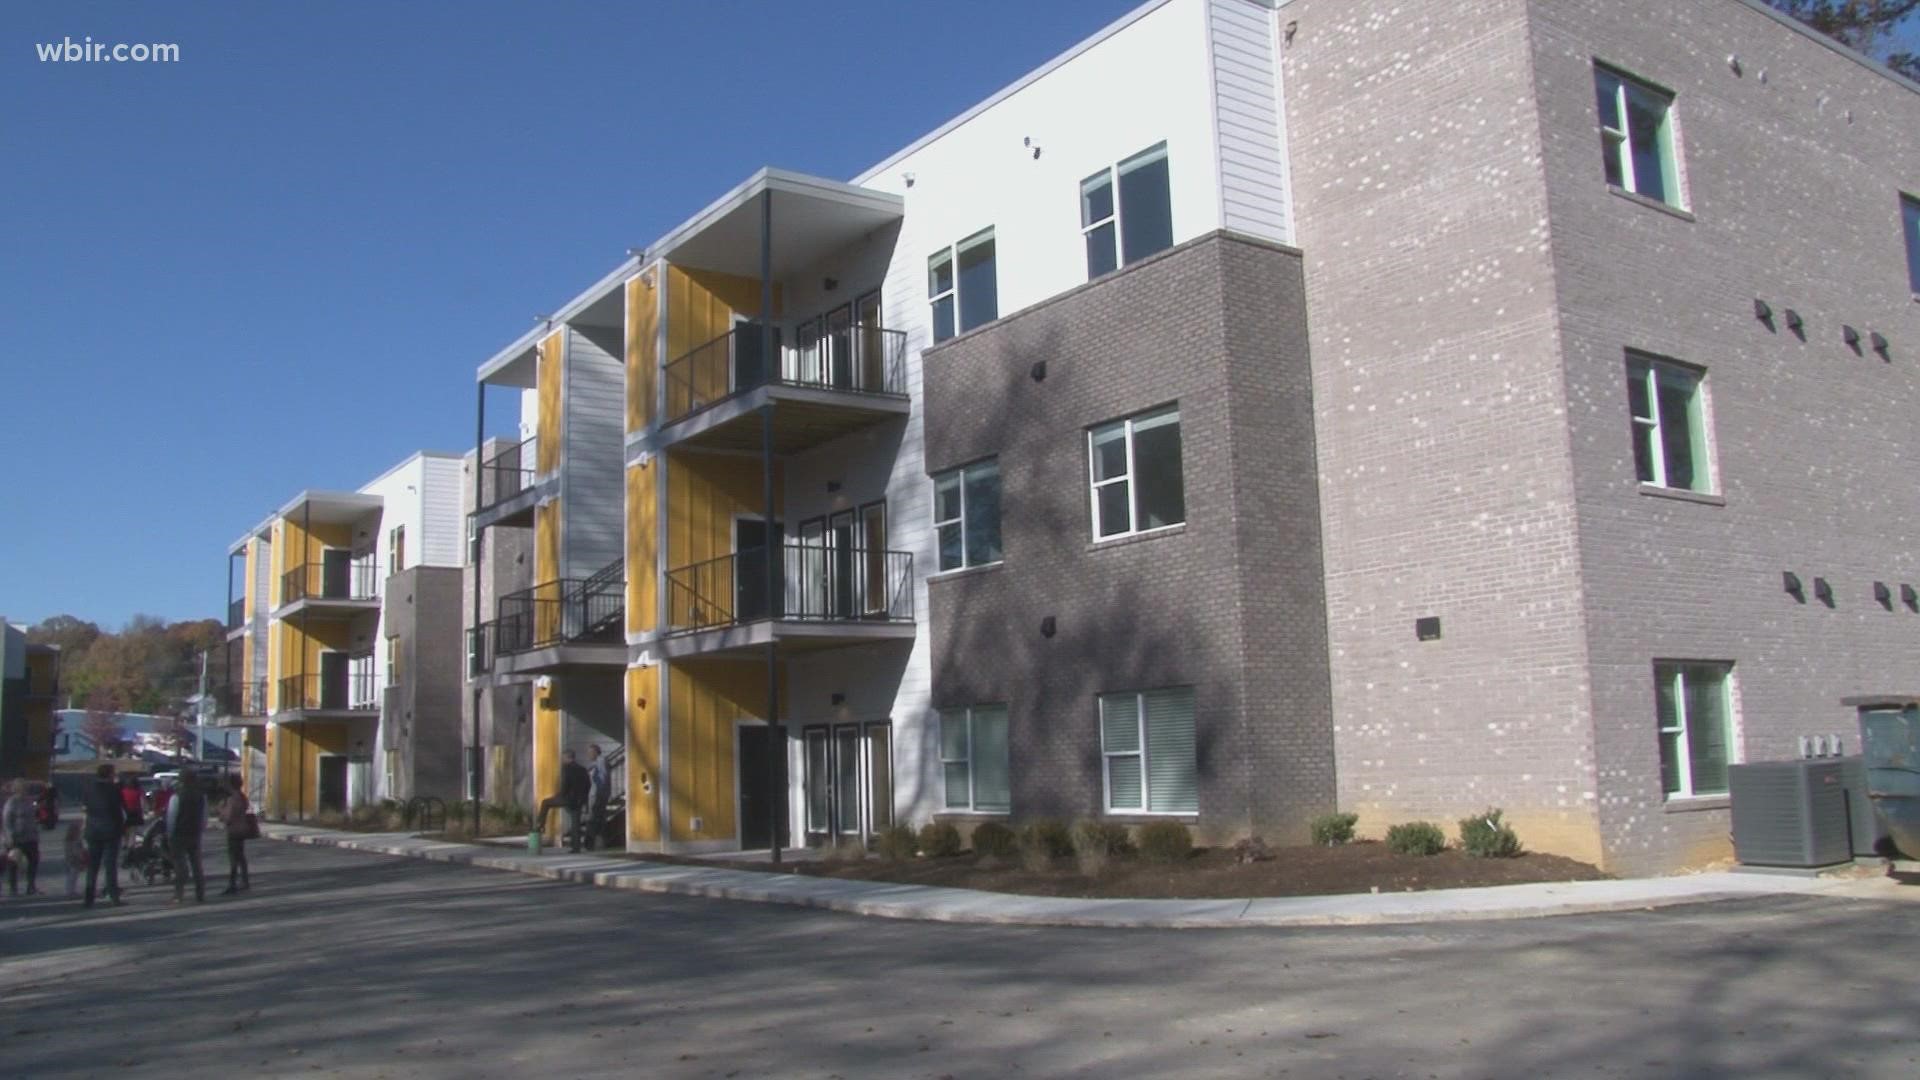 Anew affordable housing complex is now open in East Knoxville. Burlington Commons is made up of 50 units, and fills a need for more affordable housing in the city.